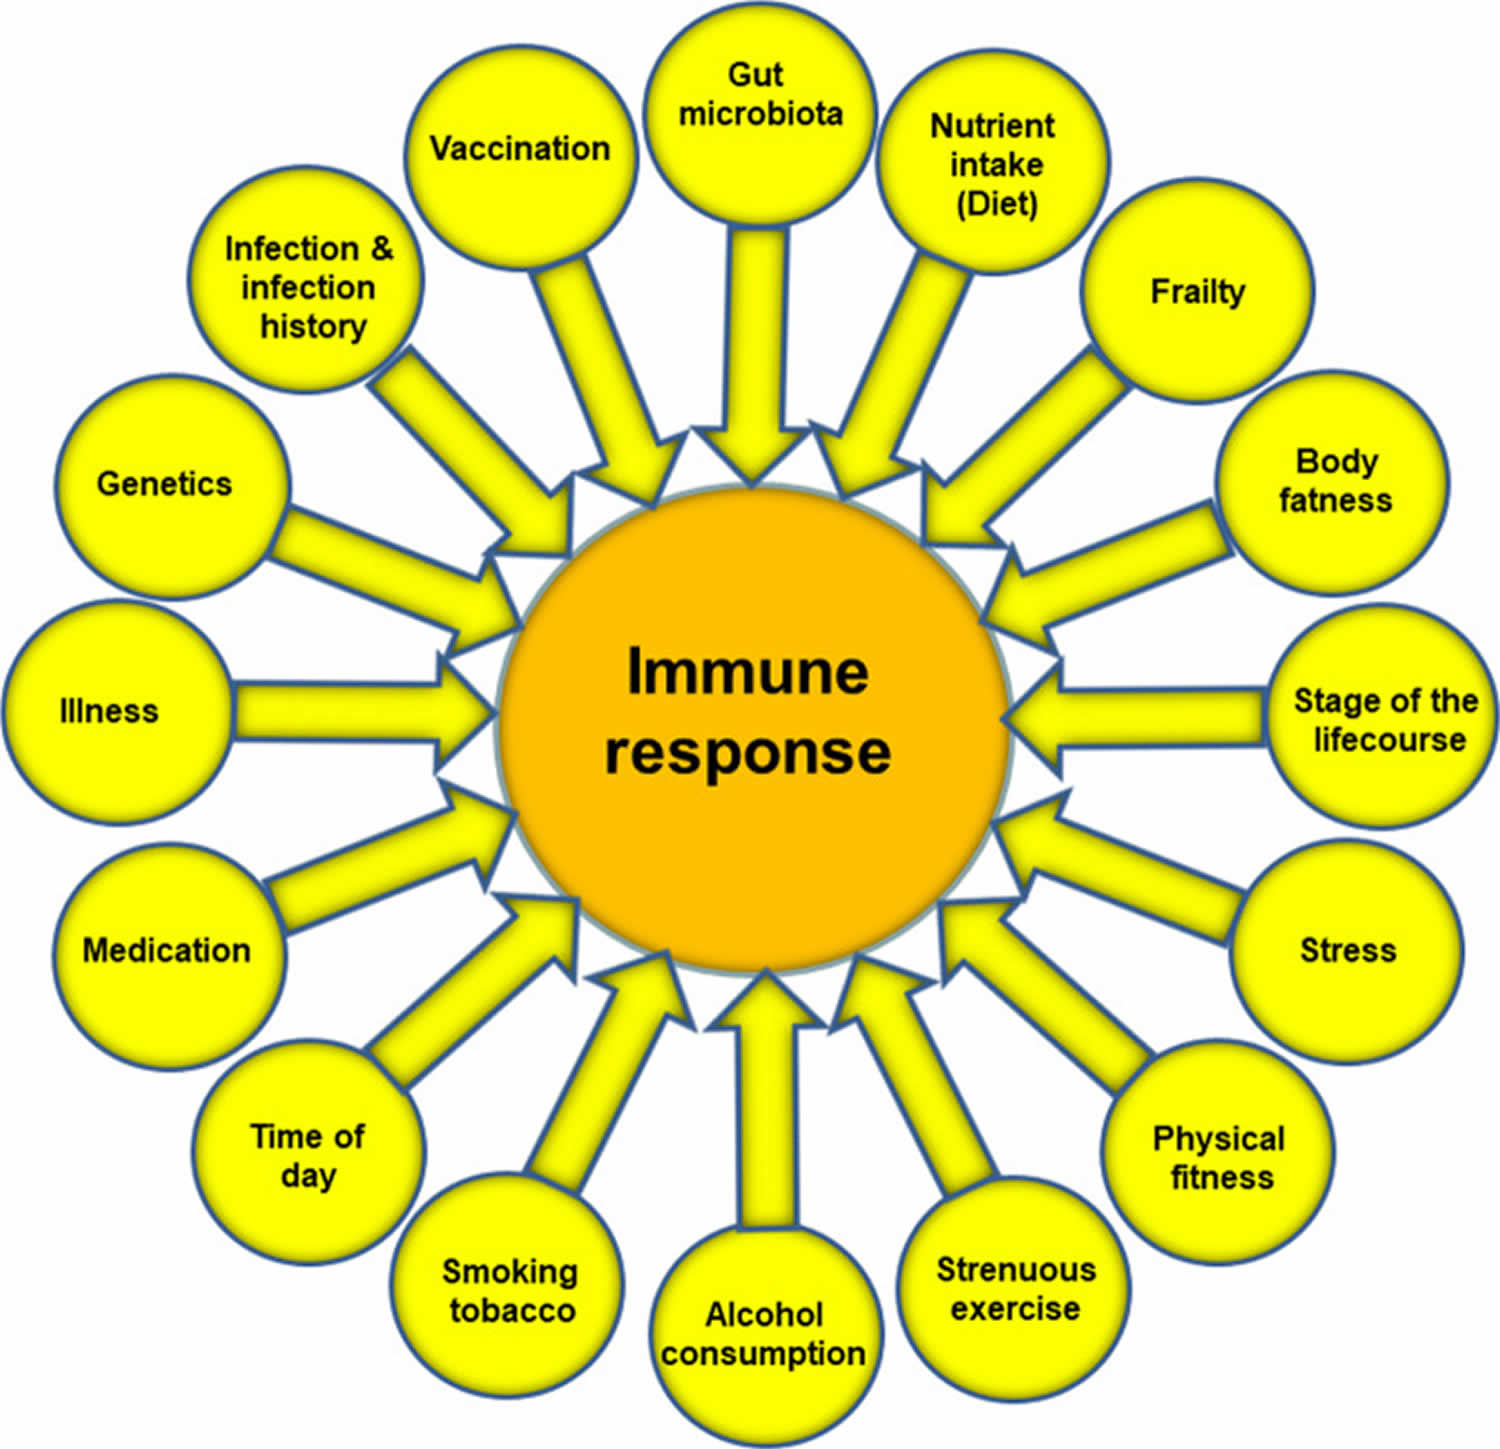 Factors that influence the immune response